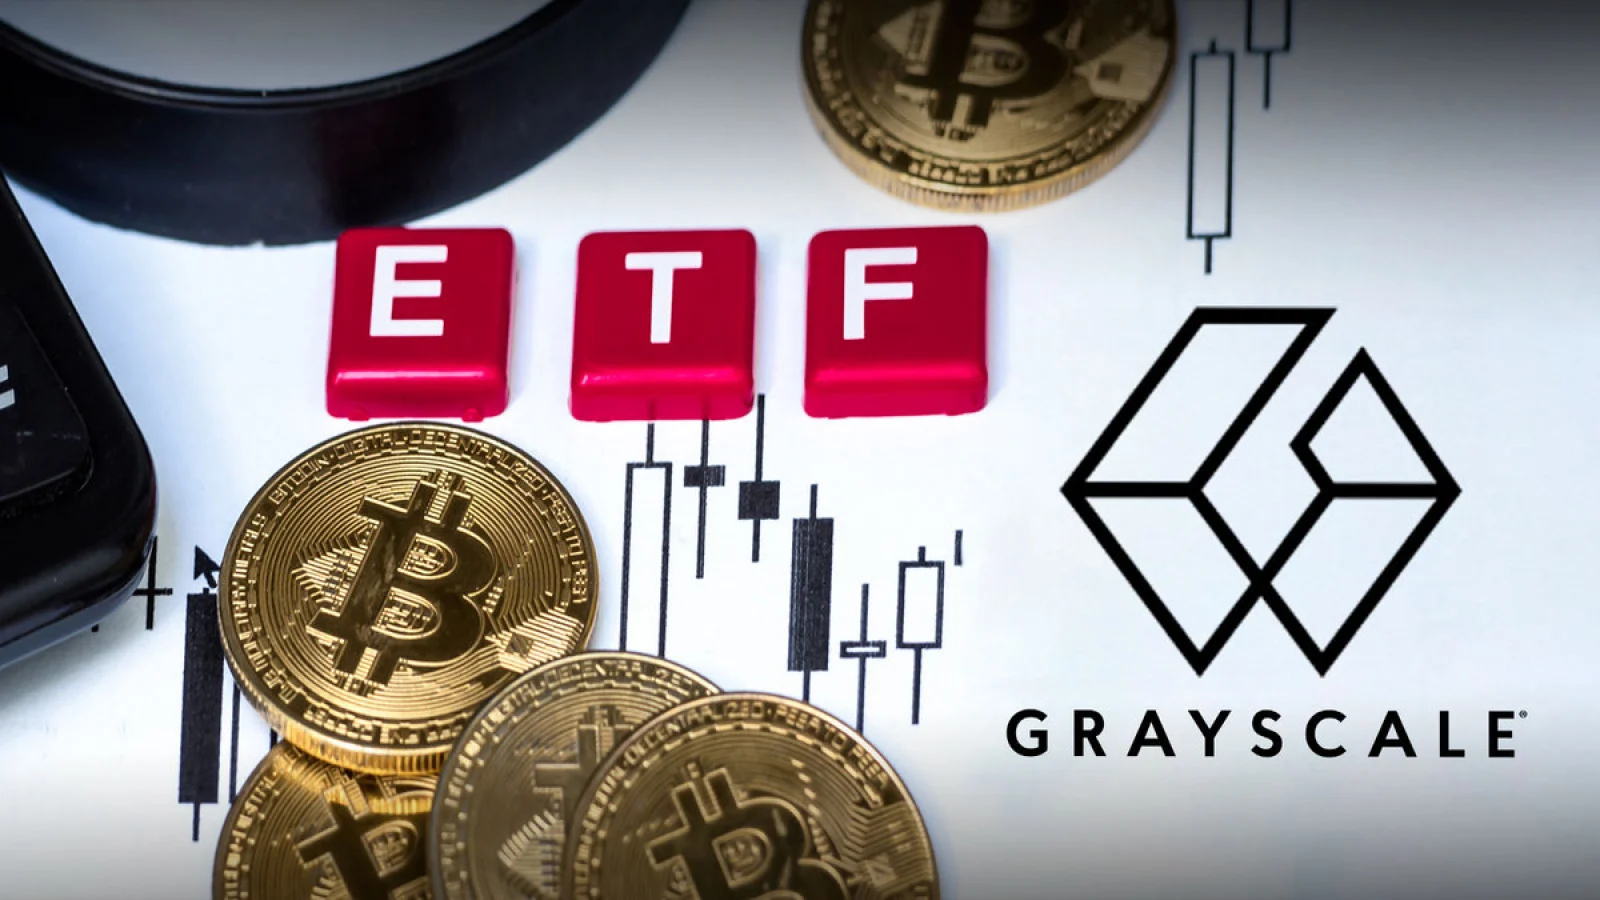 Grayscale CEO Predicts Reduction in GBTC Fees as Bitcoin ETF Market Evolves